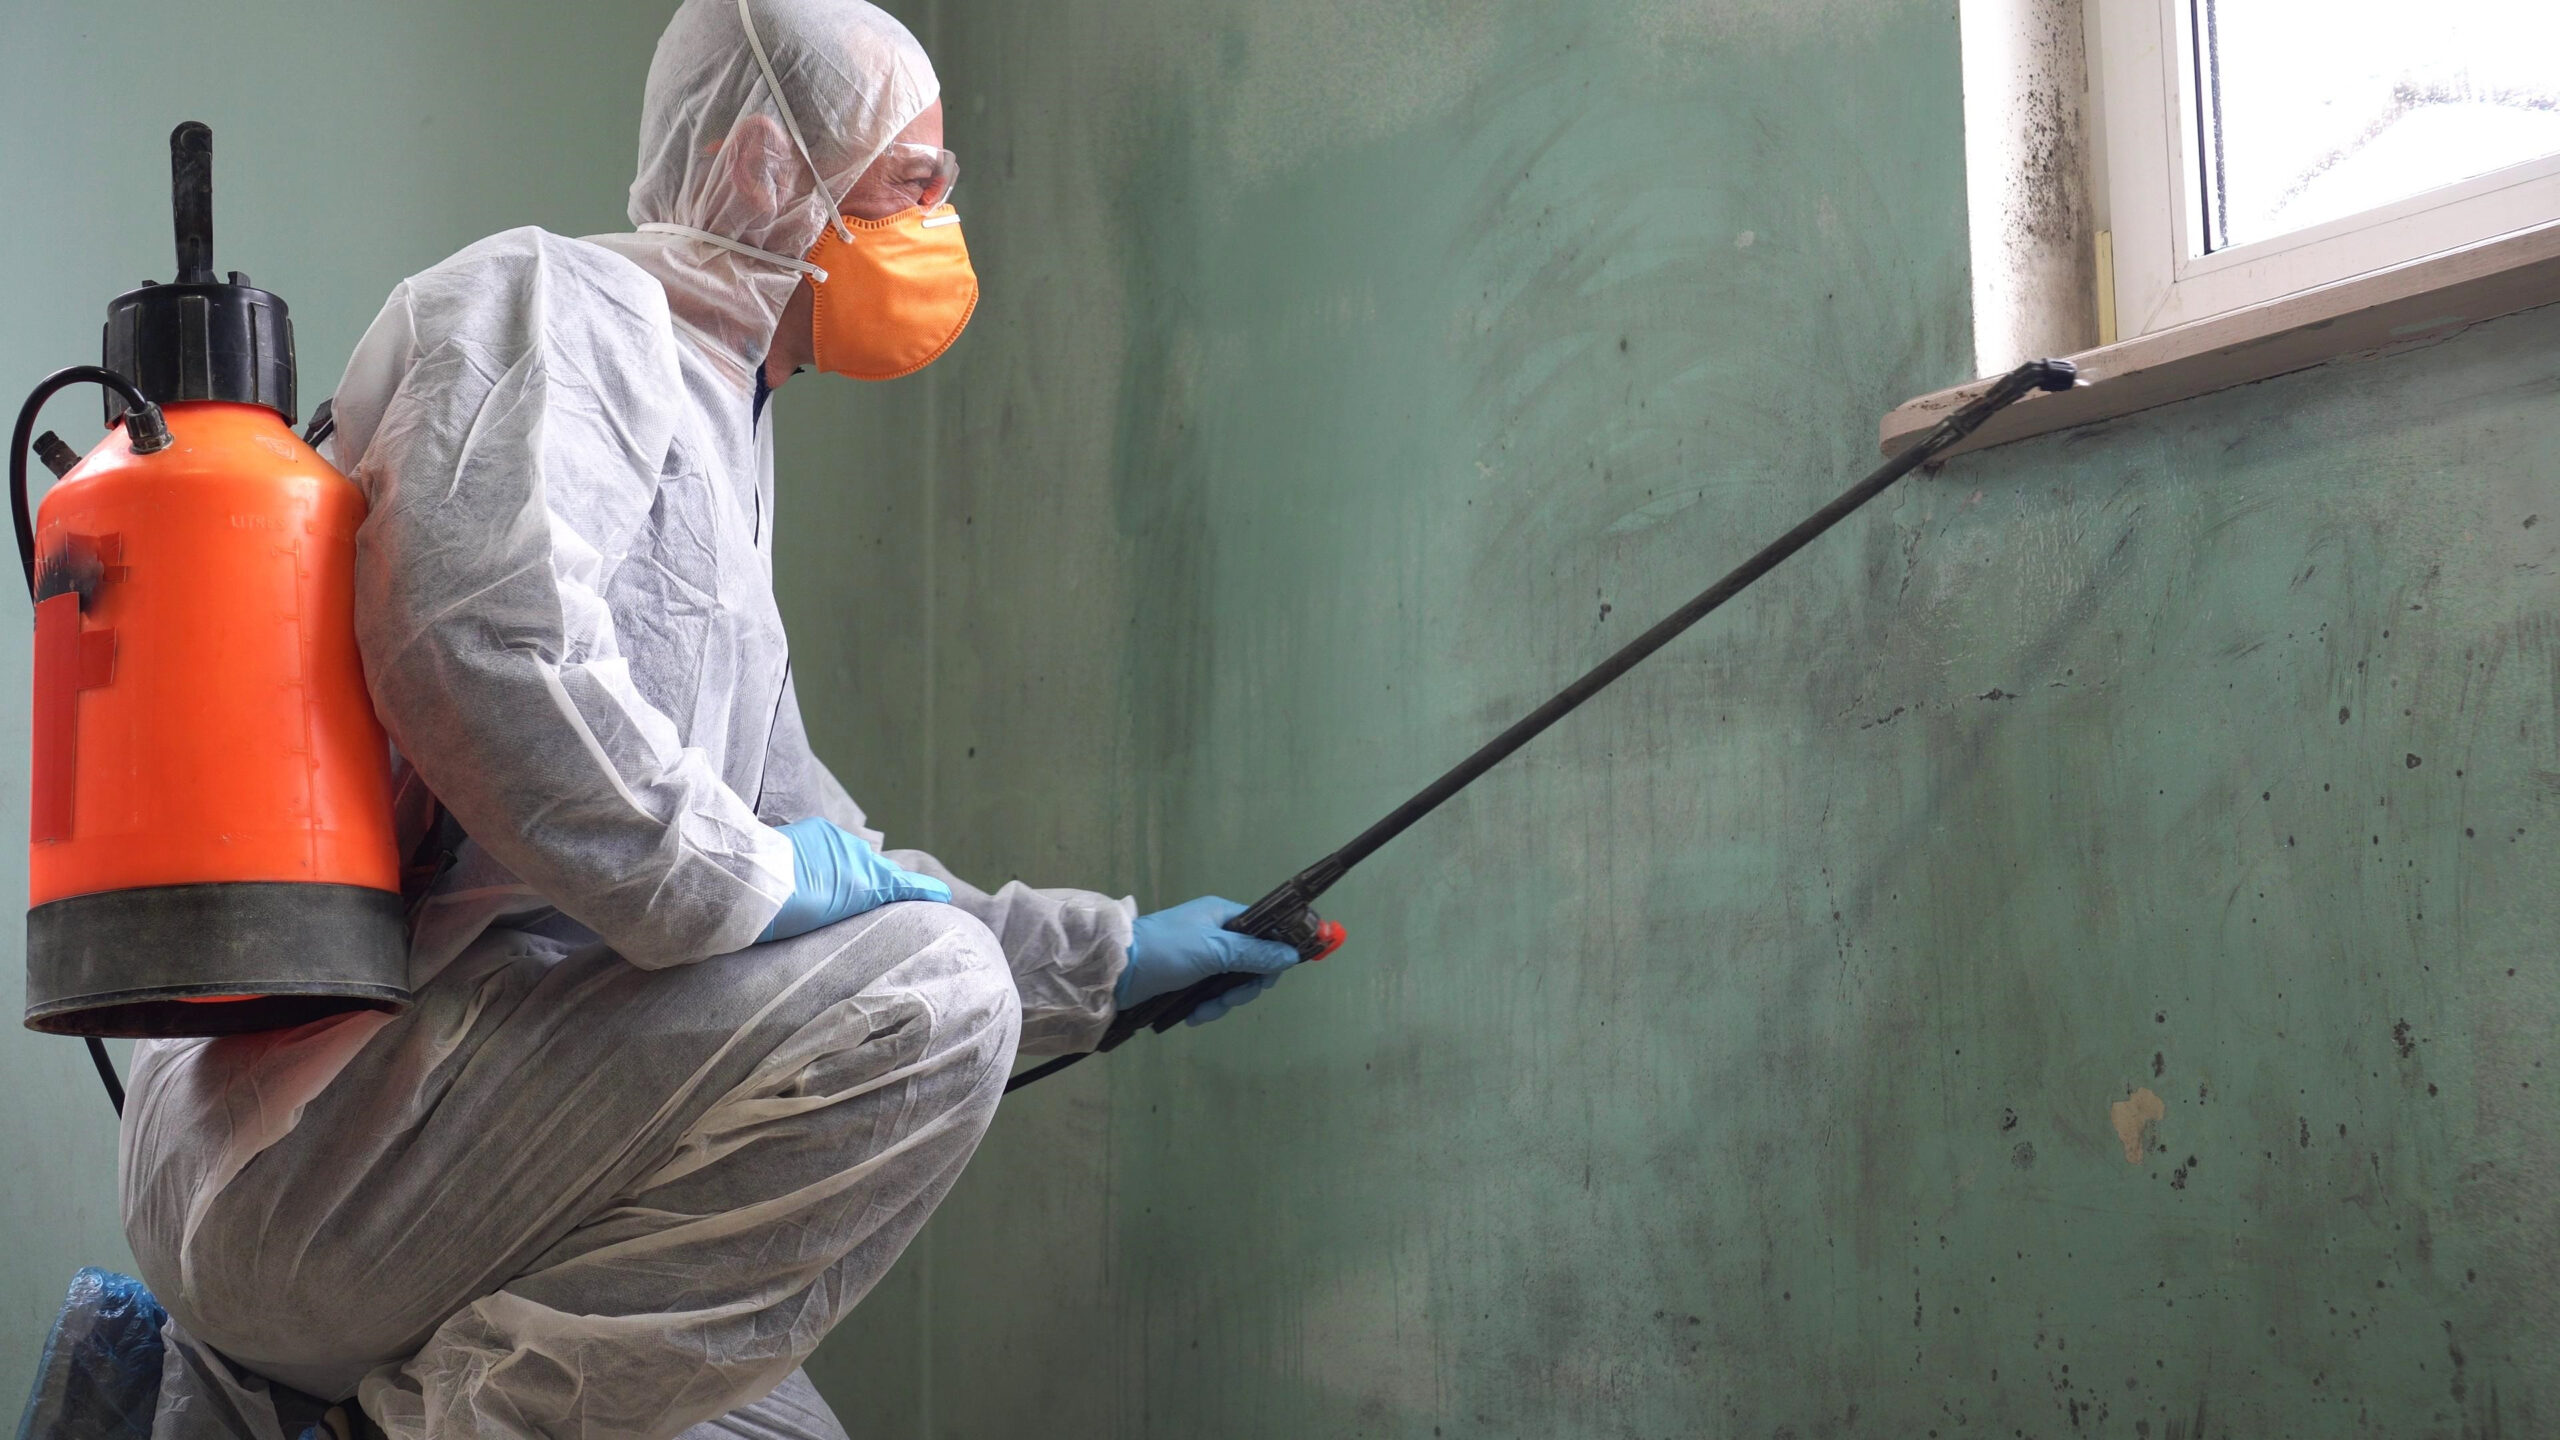 a worker in a full biological hazard suit spraying anti-fungal spray to remediate black mold